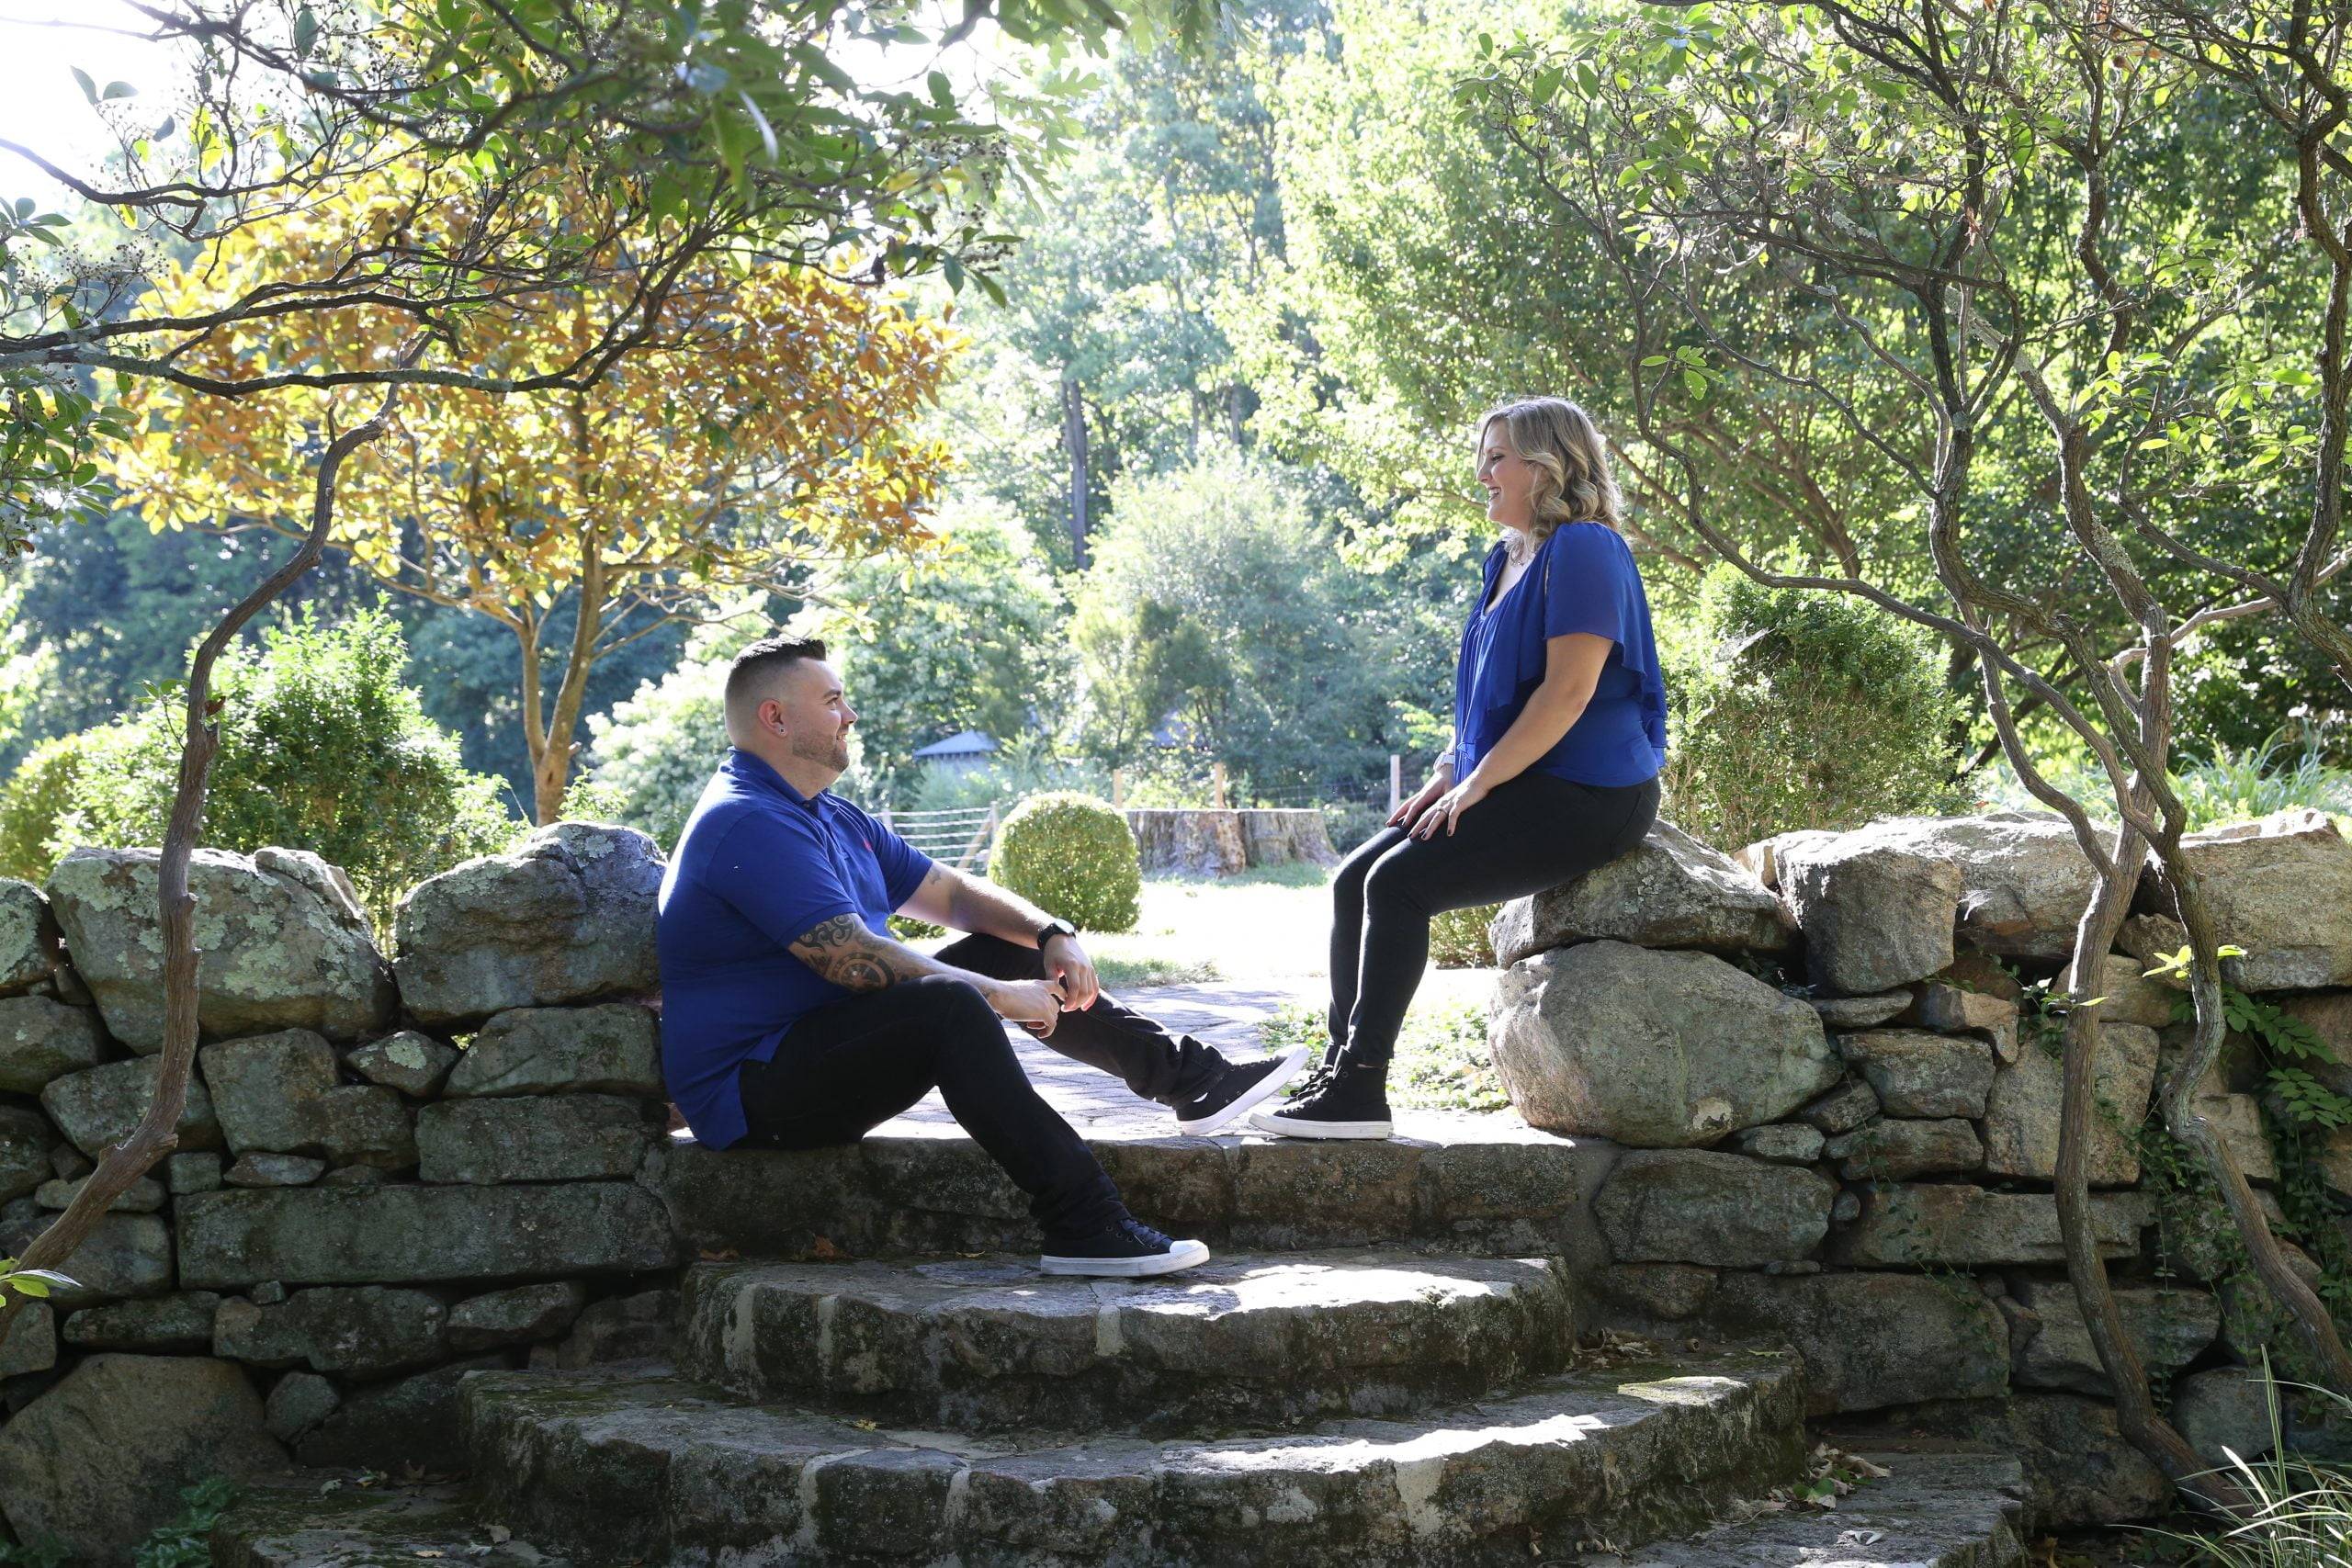 A man and woman sitting on stone steps in a garden.